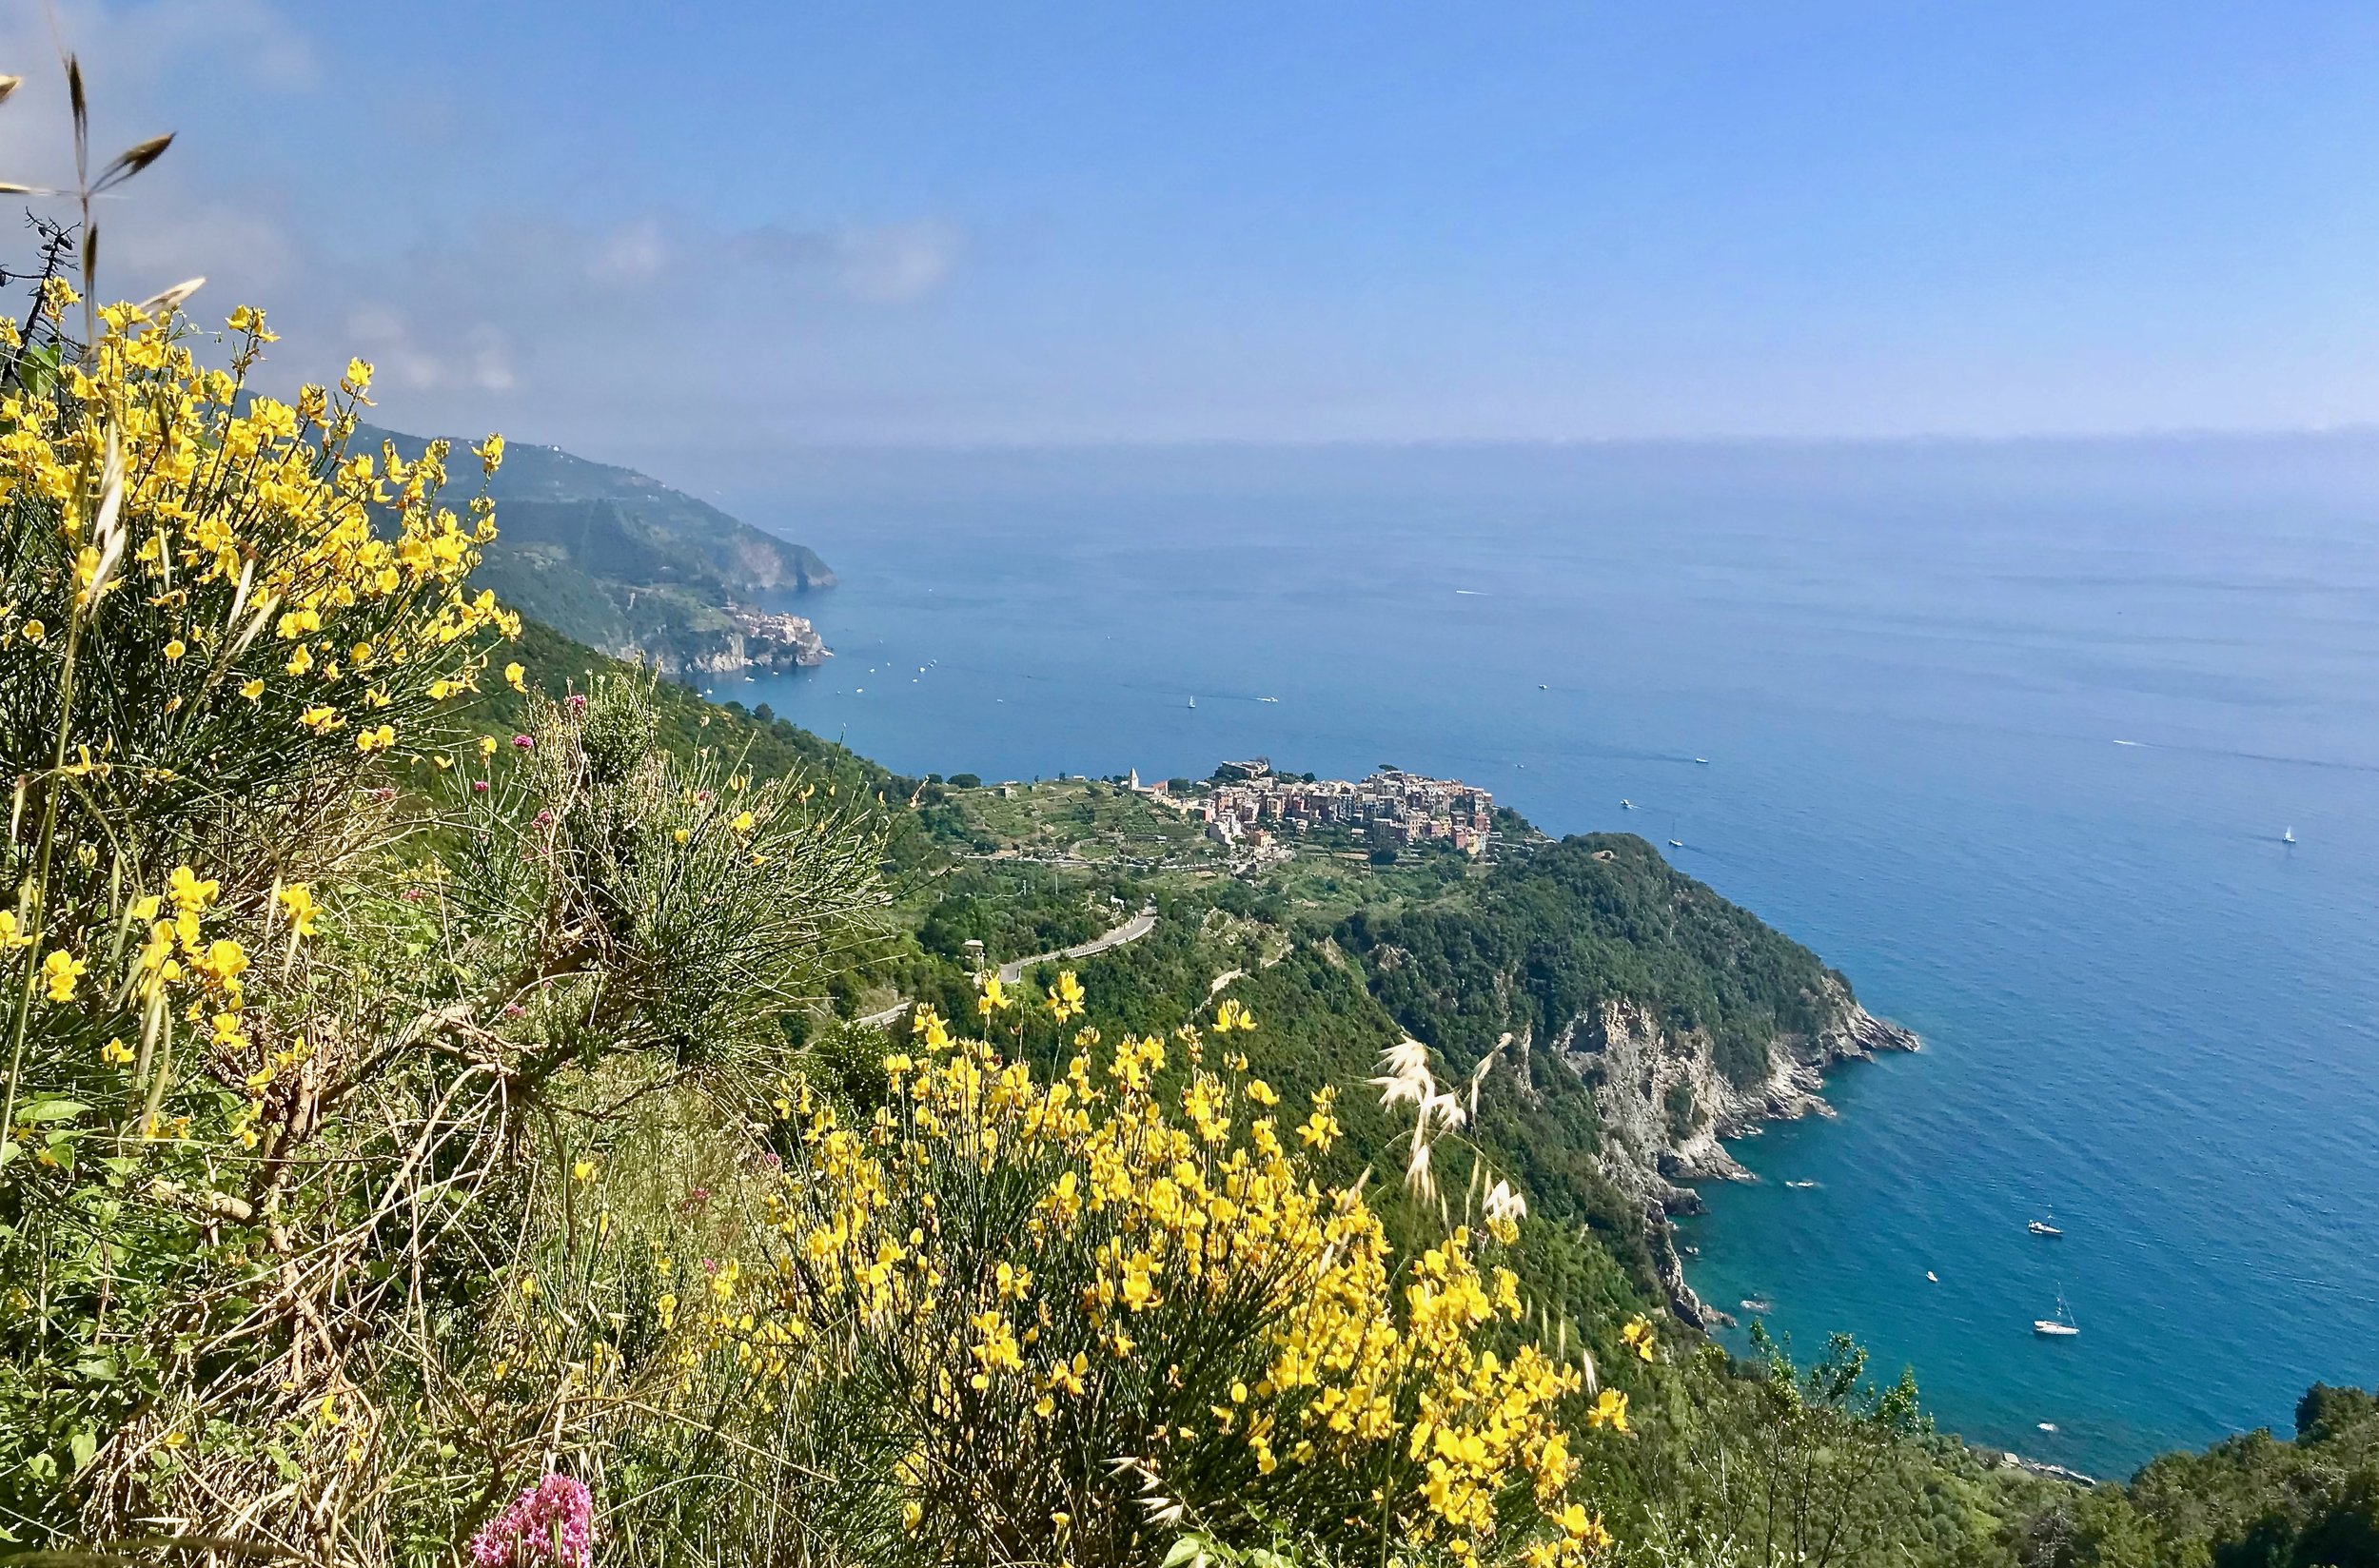 How to Hike the Cinque Terre